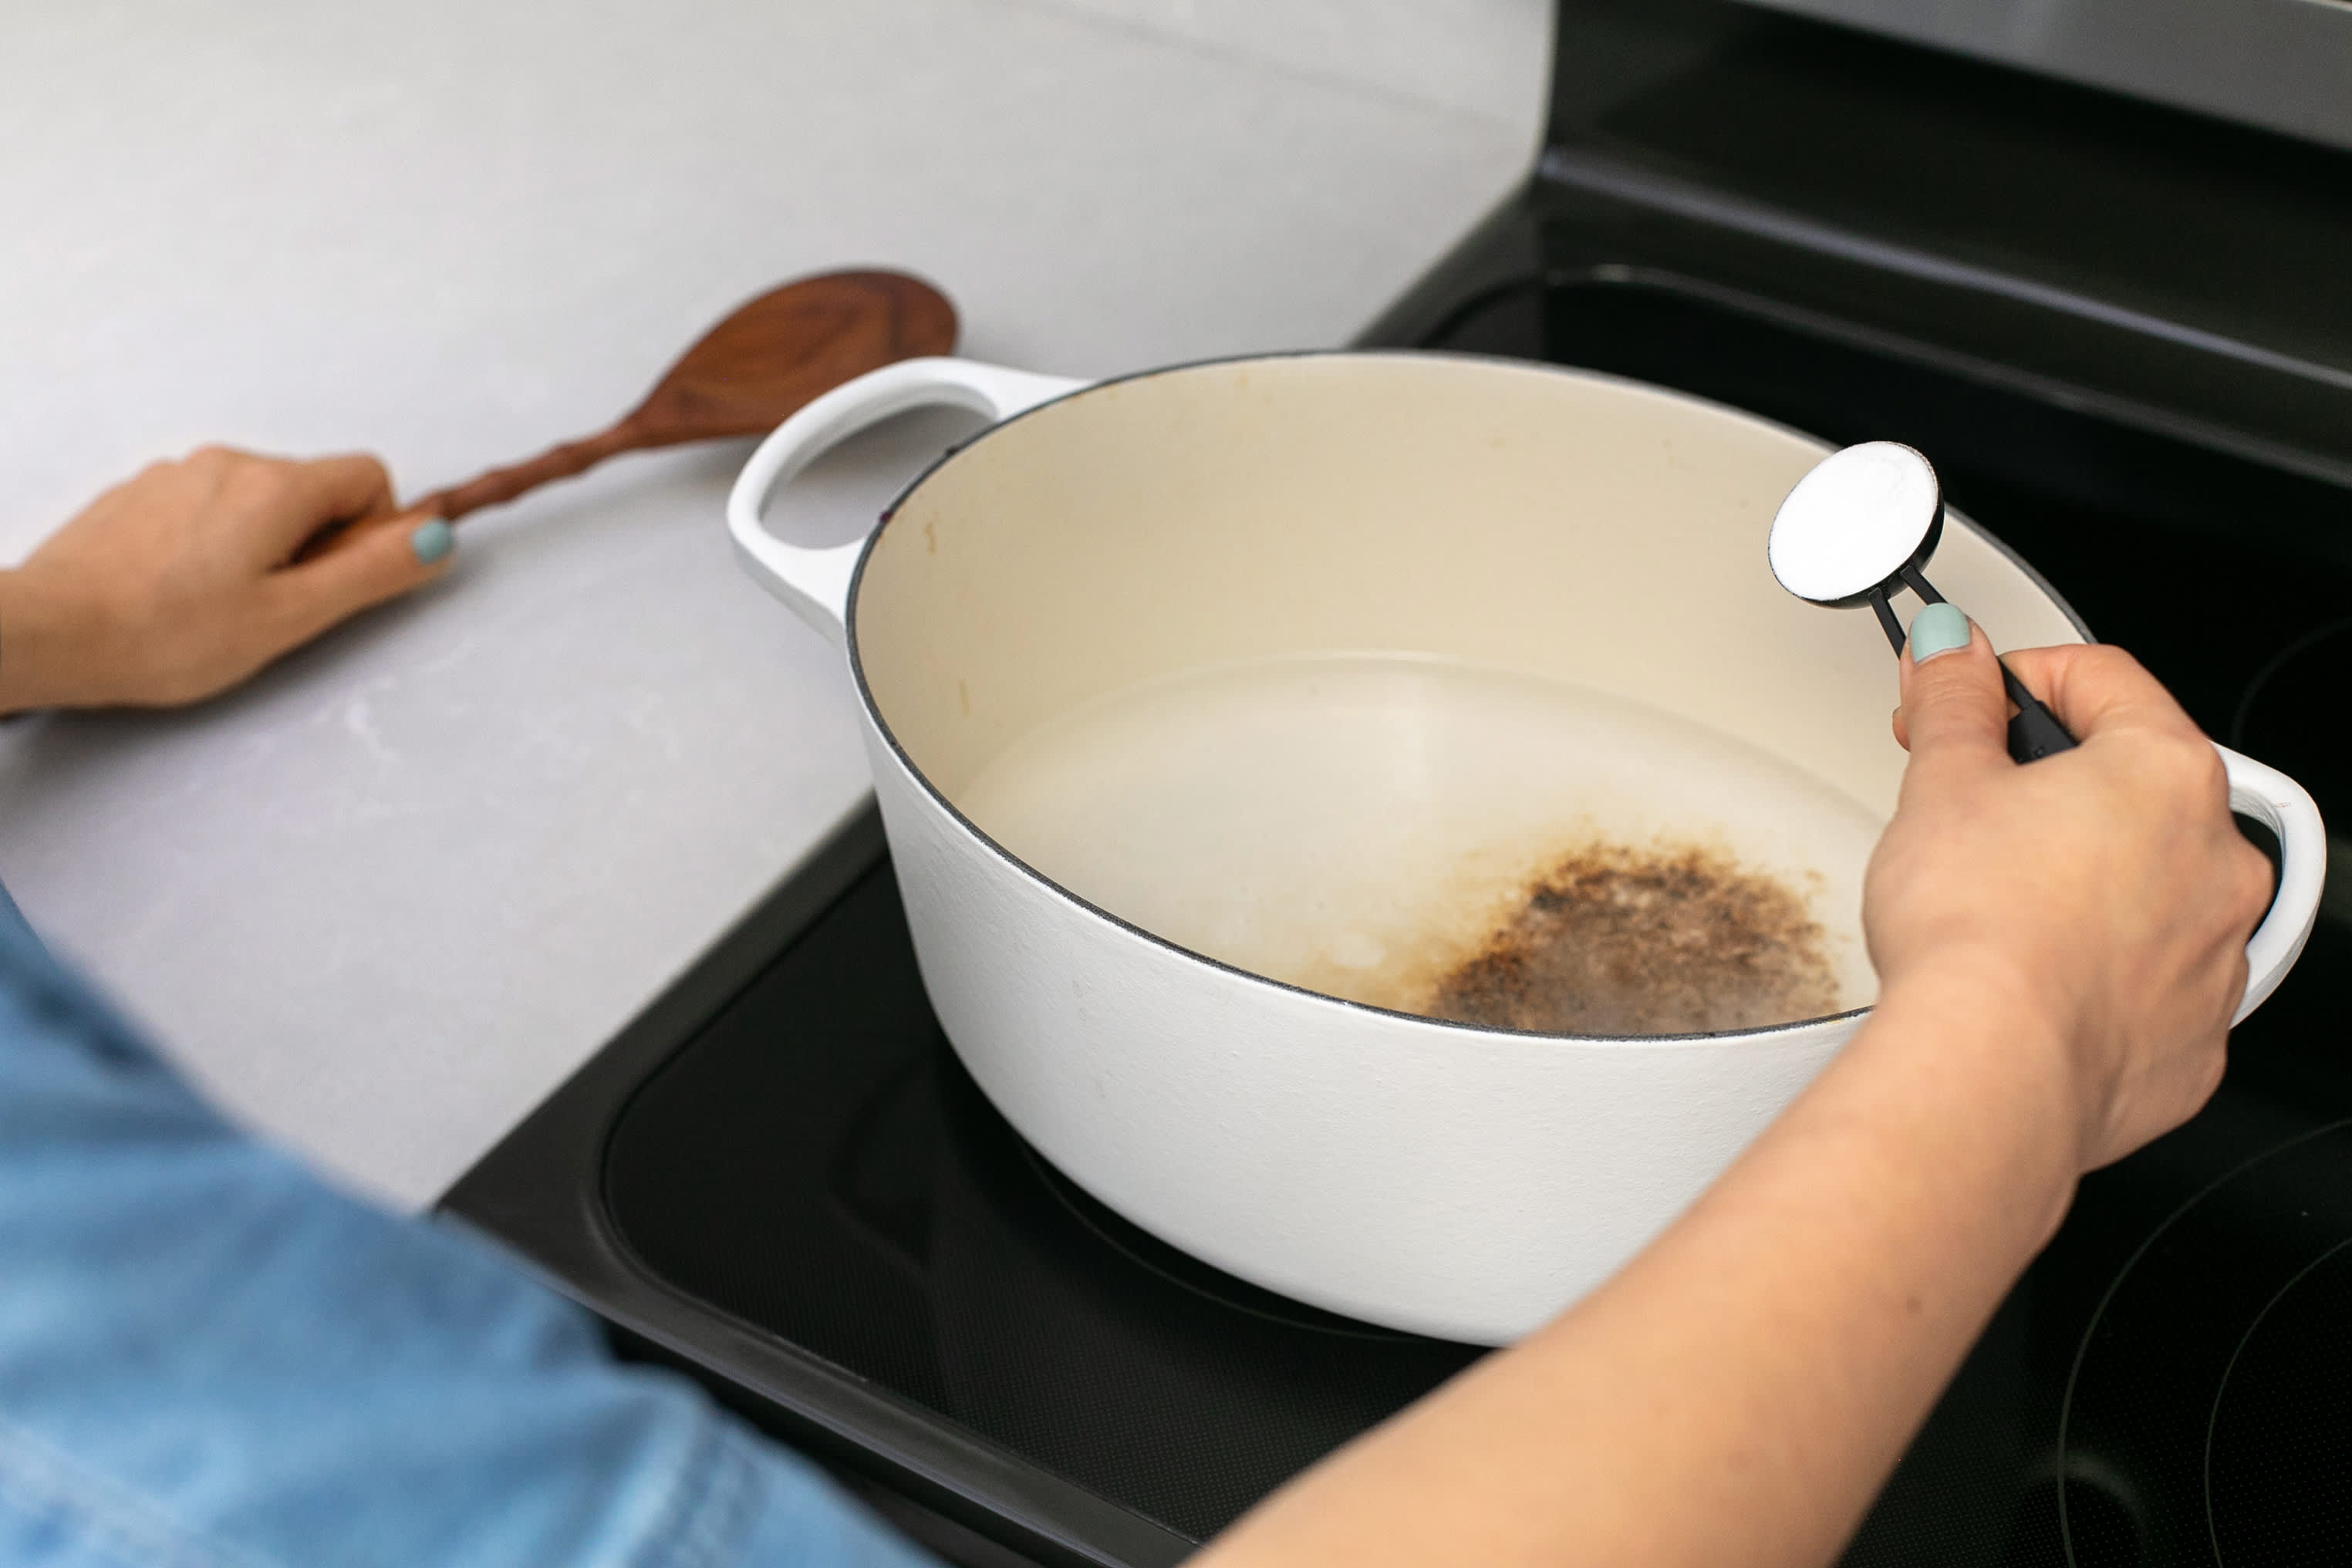 How To Clean Enameled Cast Iron Cookware with BAKING SODA, Frying Pan